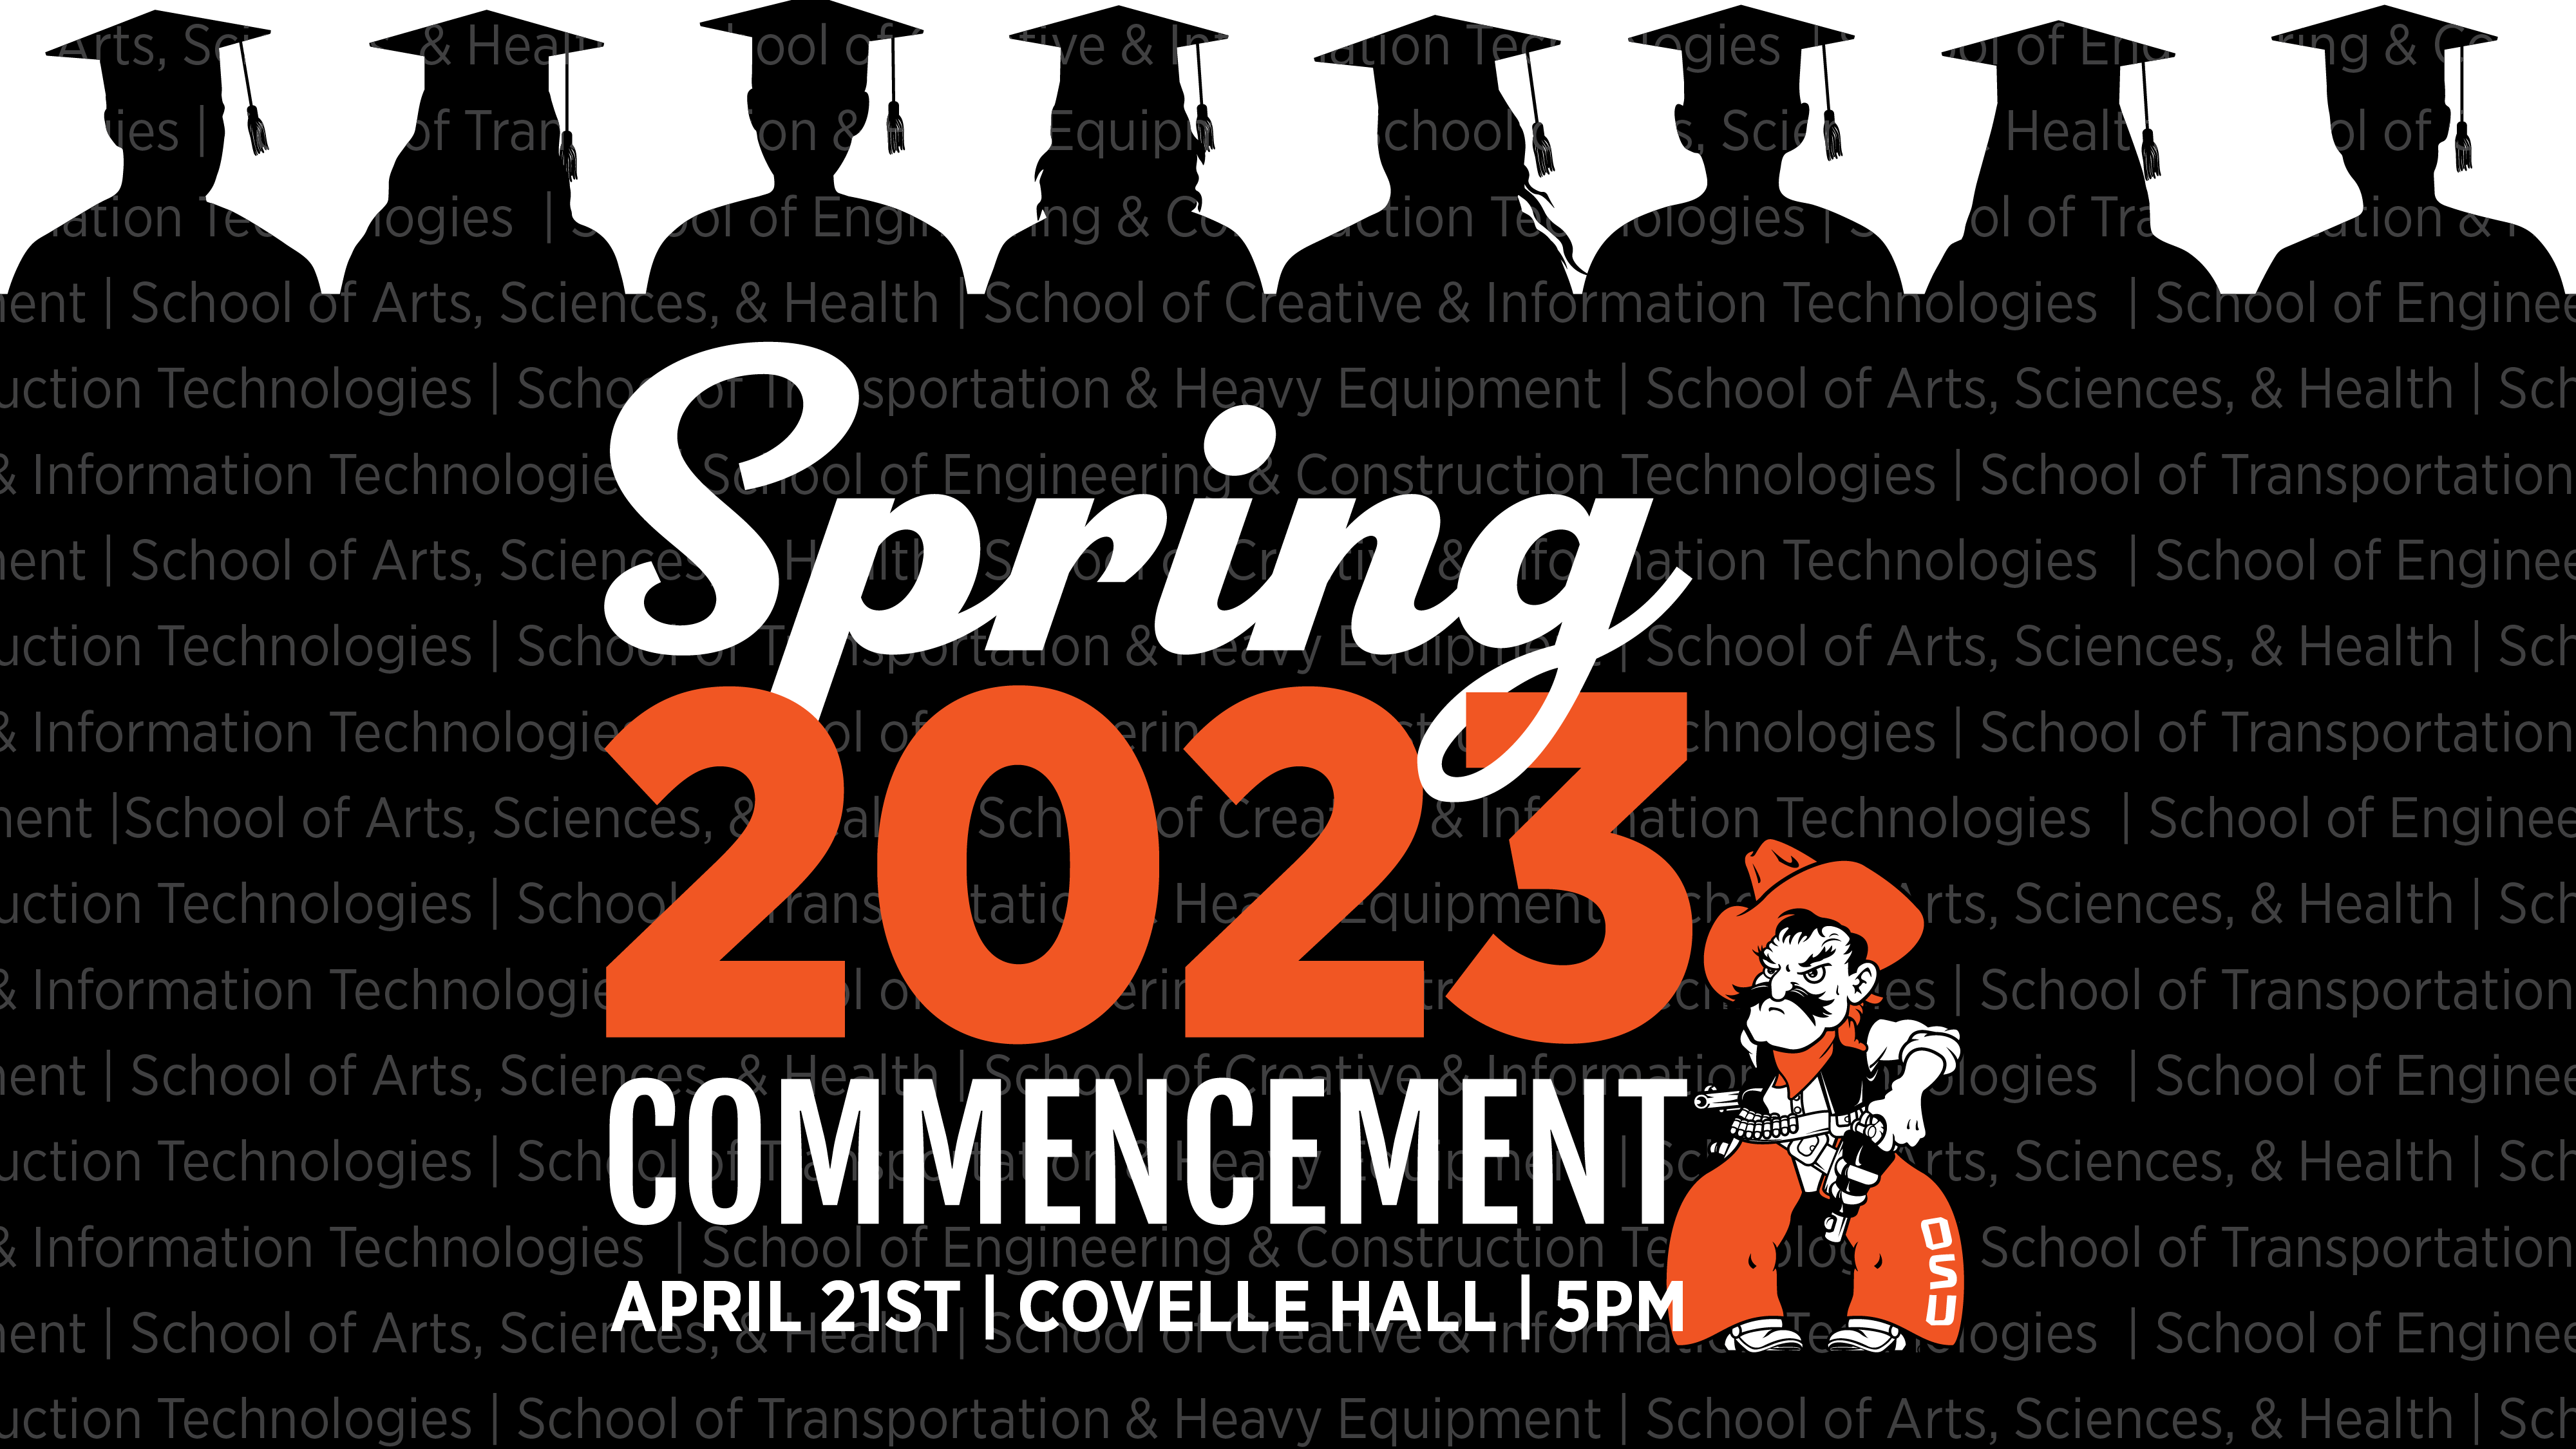 OSUIT's 224th Commencement To Spotlight Workforce-Ready Graduates and Inspiring Speakers Thursday, April 6, 2023